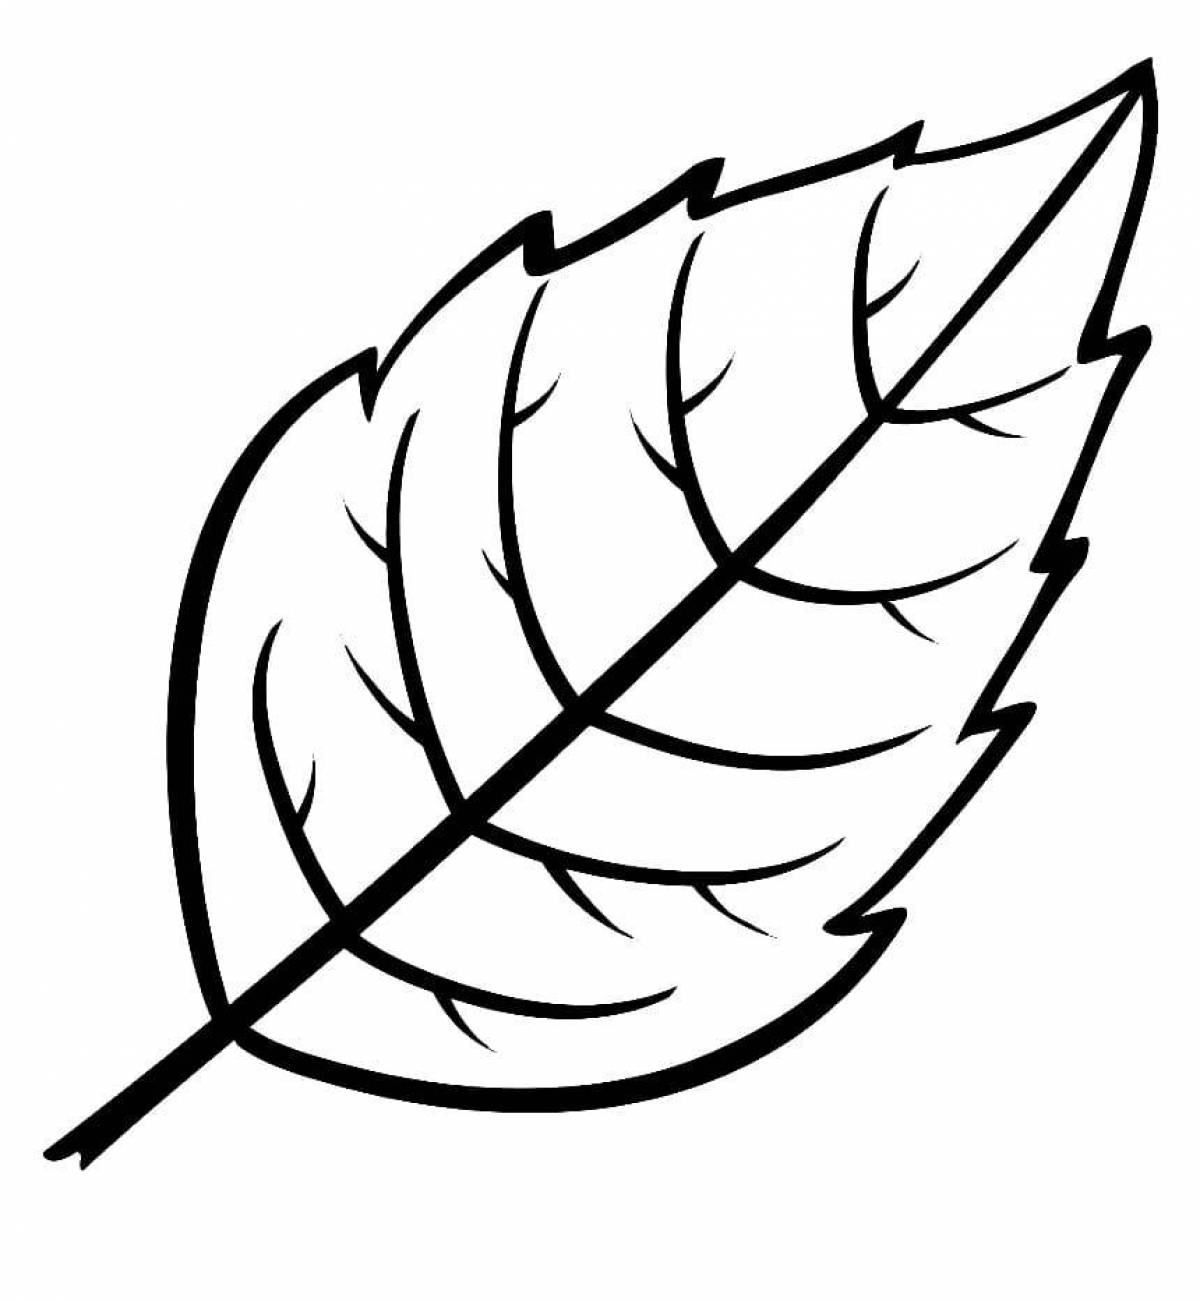 Exquisite leaves coloring pages